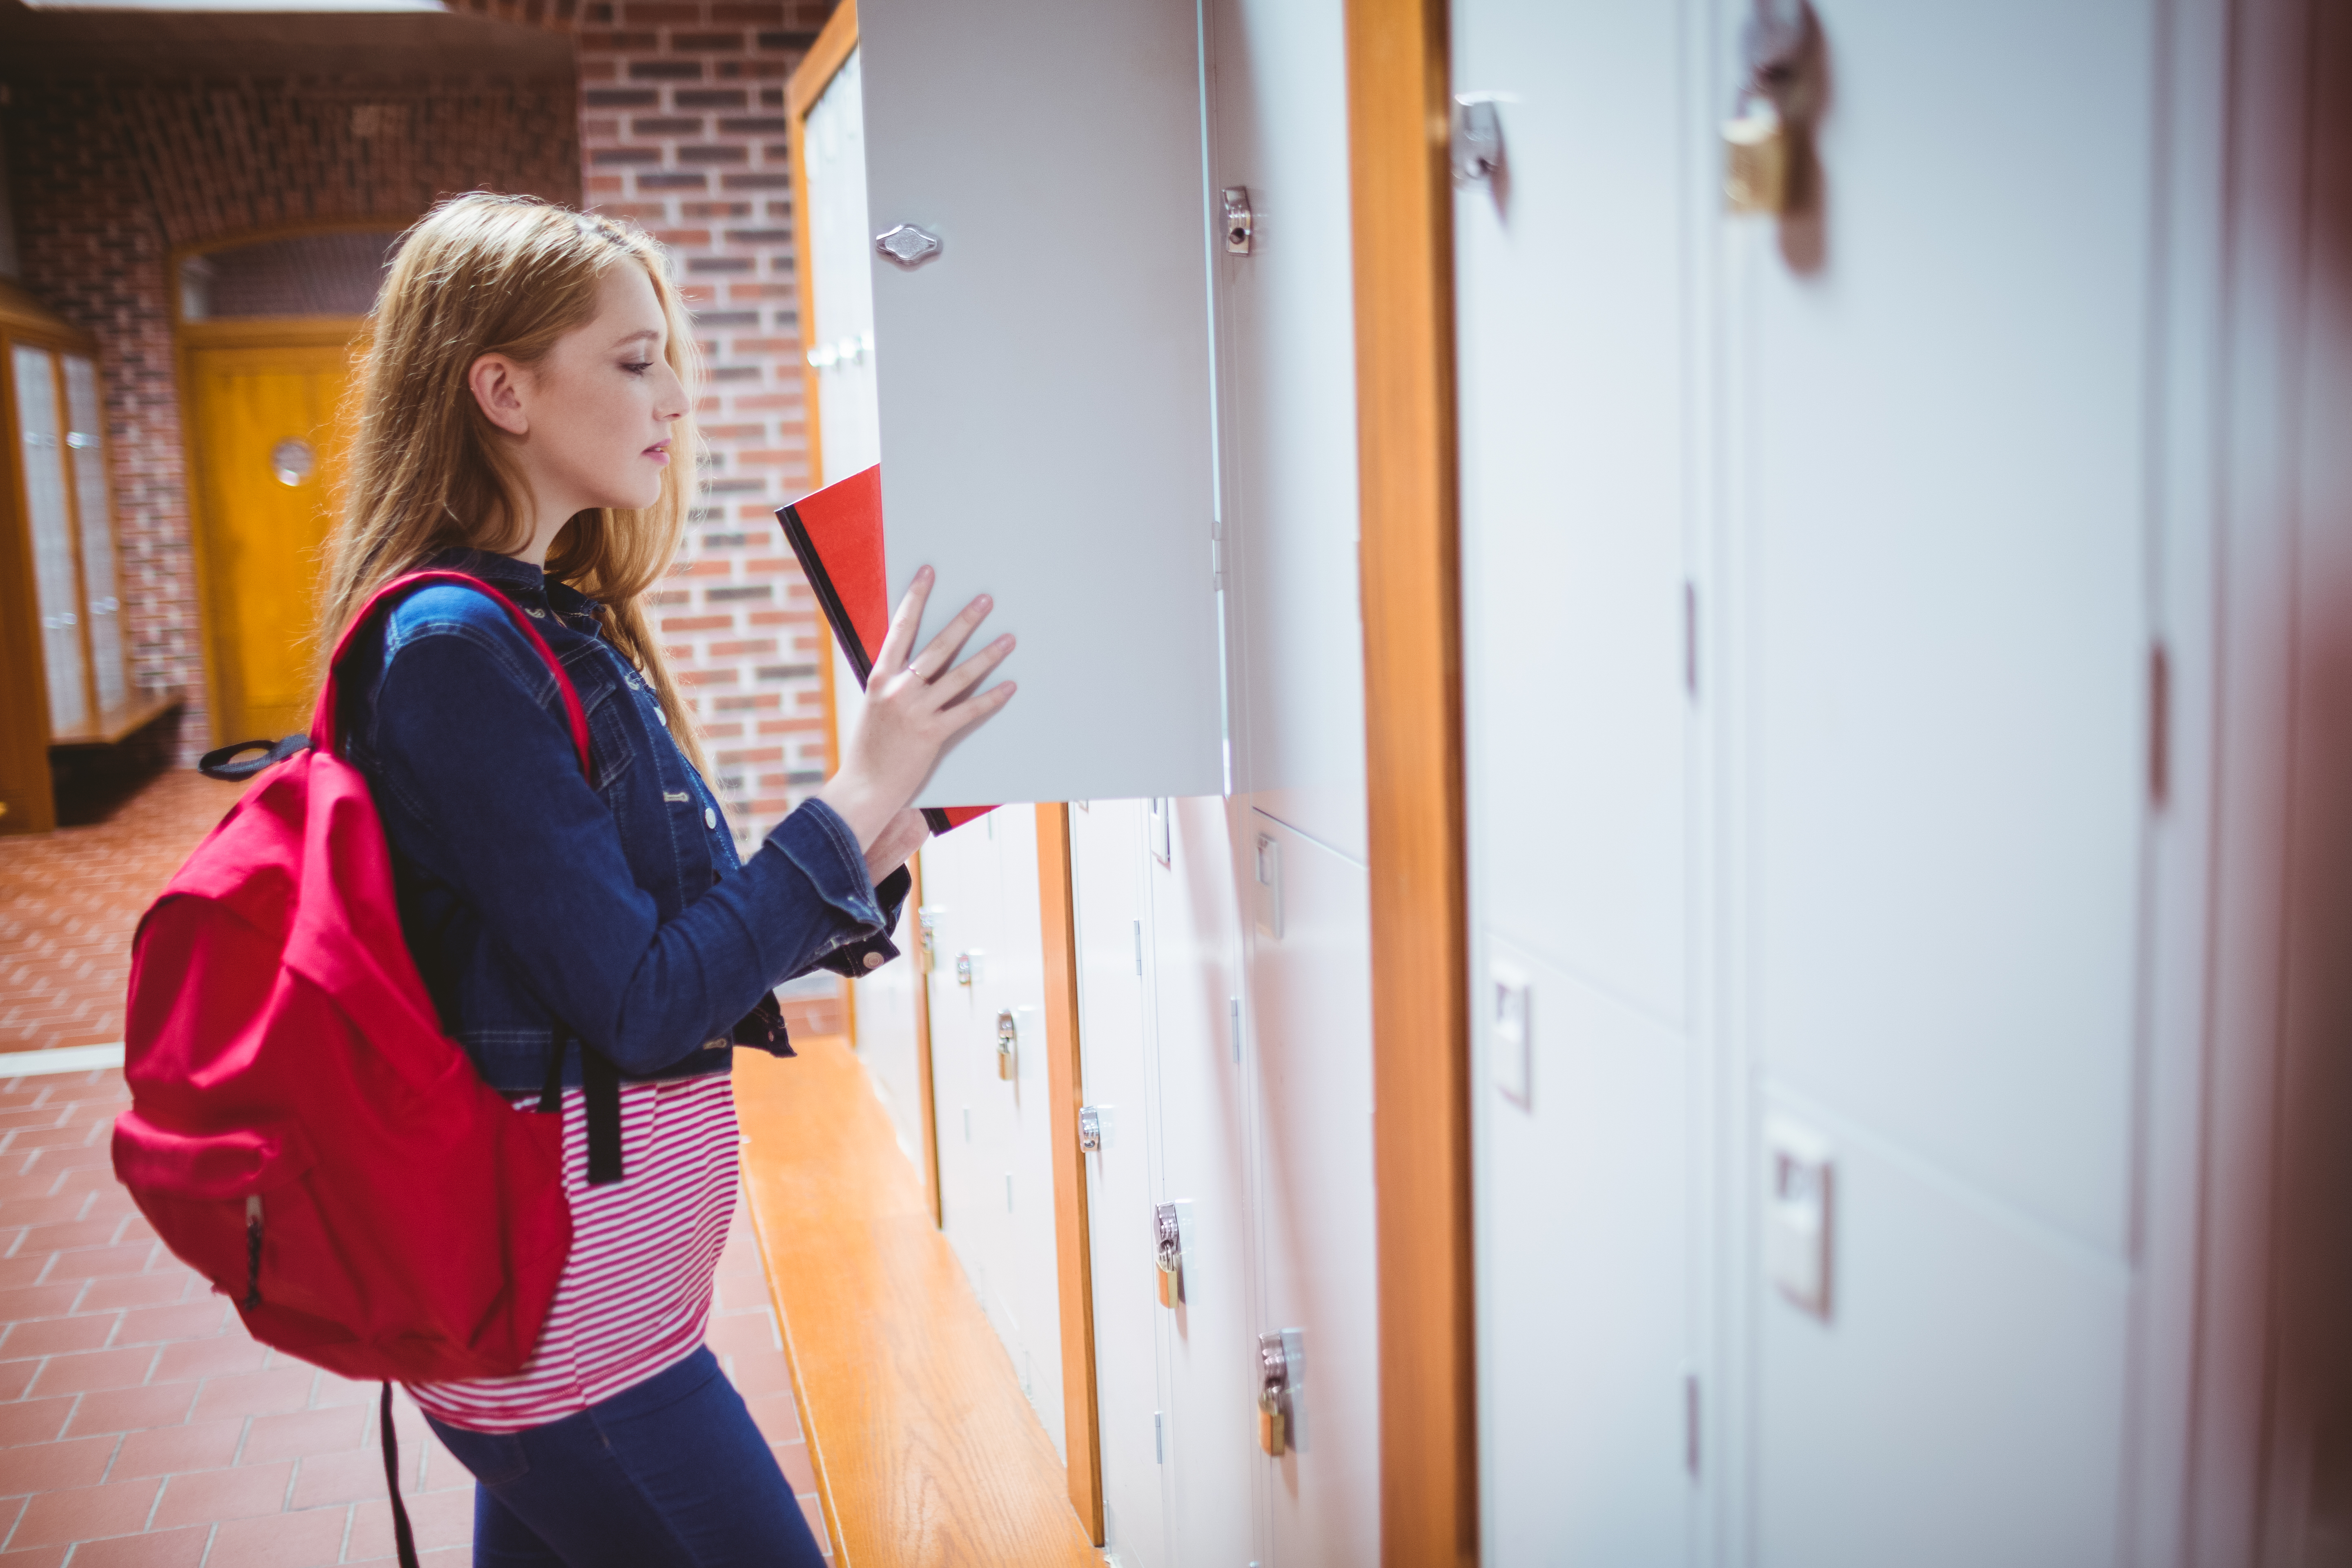 Student with backpack putting notebook in the locker at school. | Source: Shutterstock